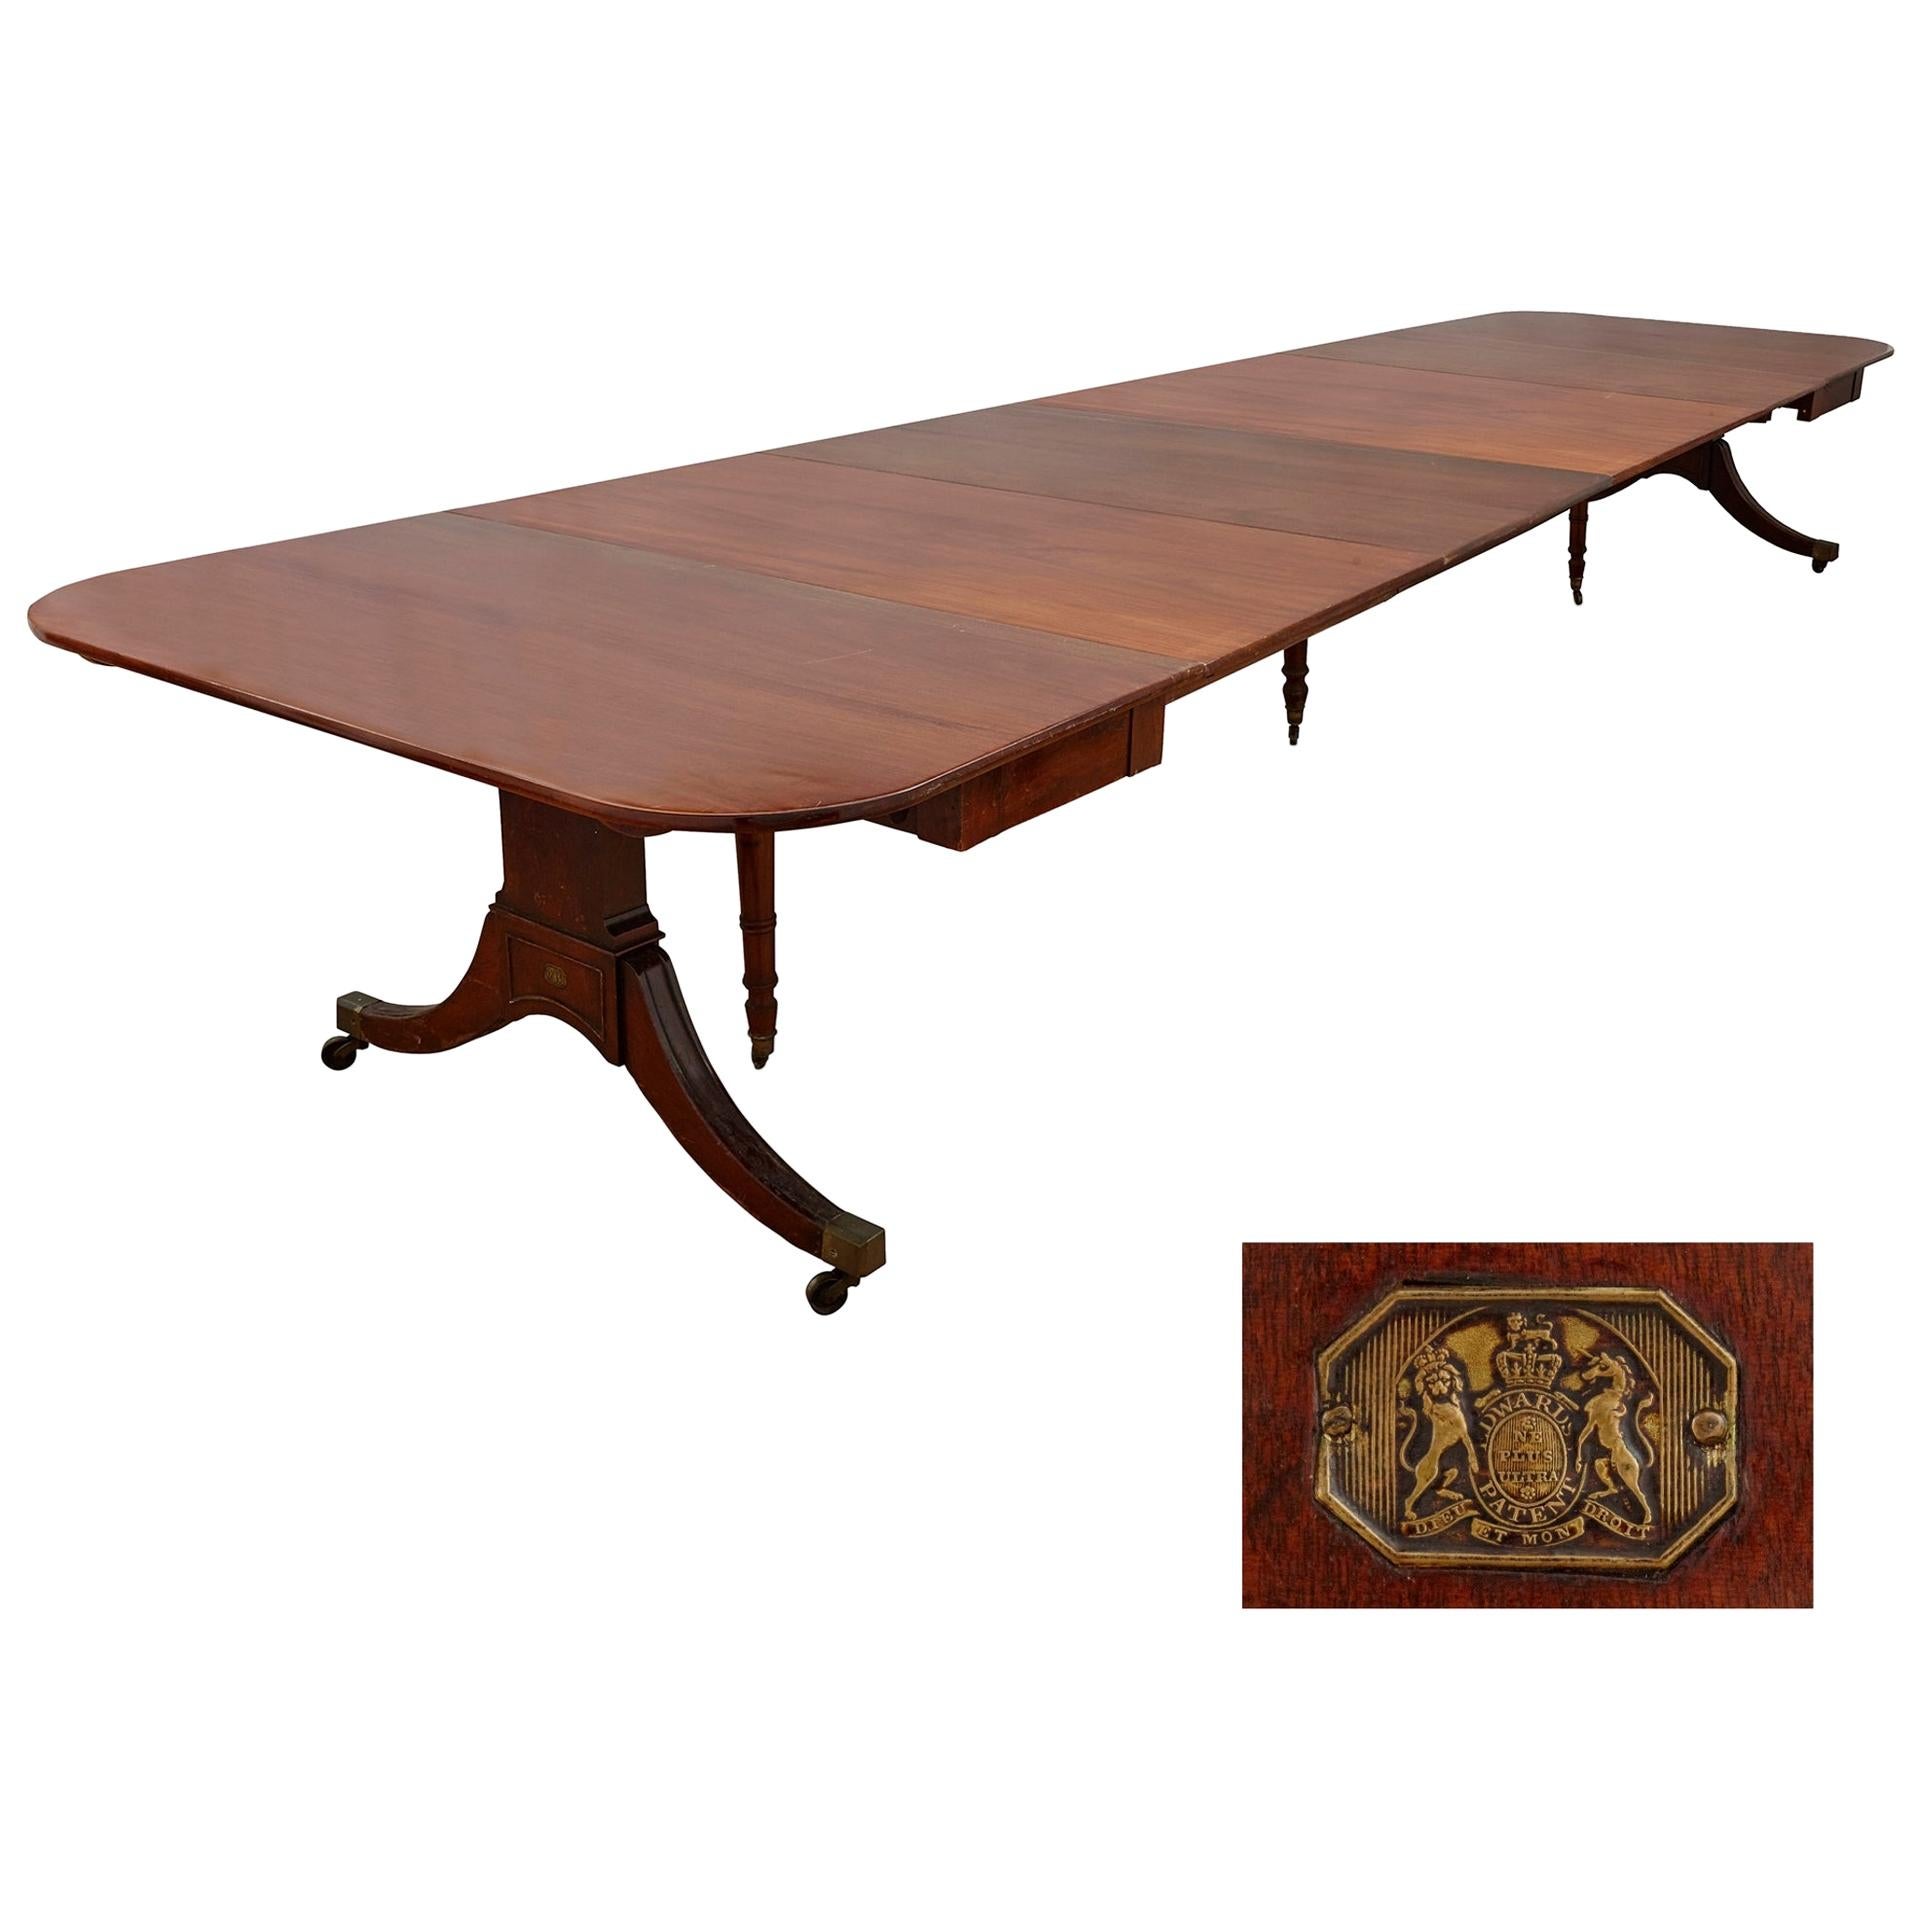 Early 19th Century 'Cumberland' Mahogany Dining Table by David Edwards For Sale